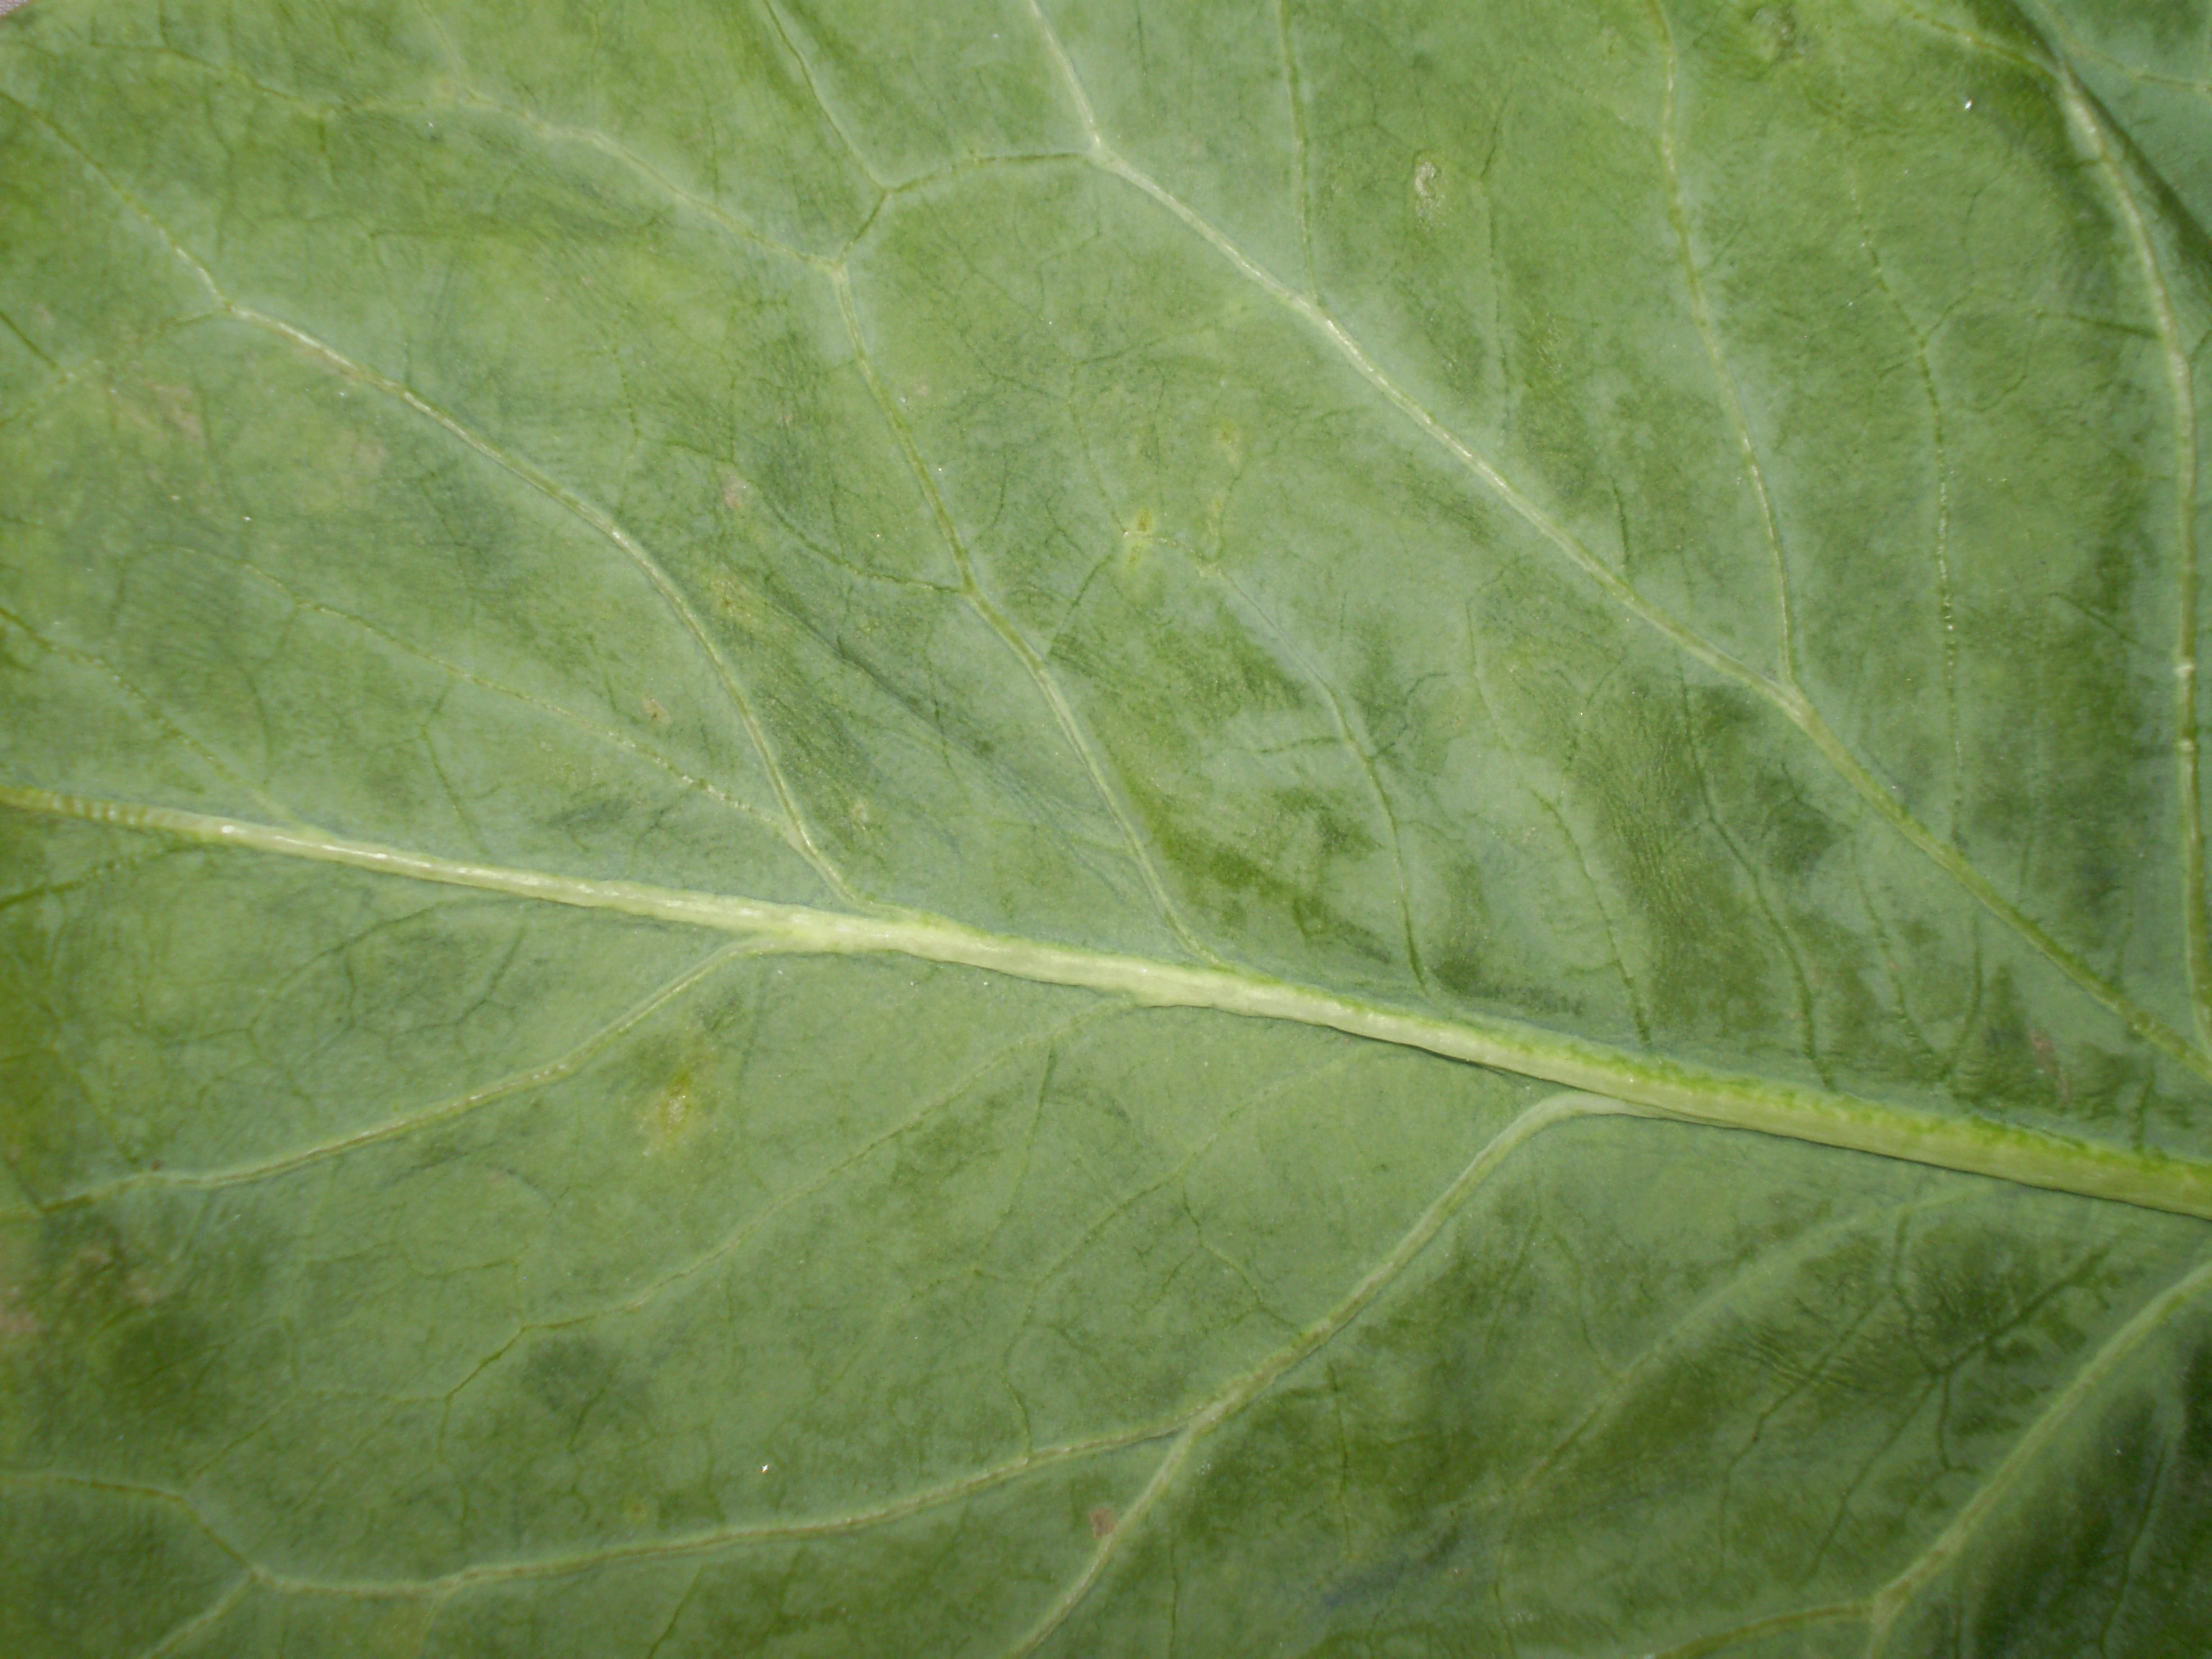 The net like appearance of the veins in a Kohlrabi leaf (as taken by myself)